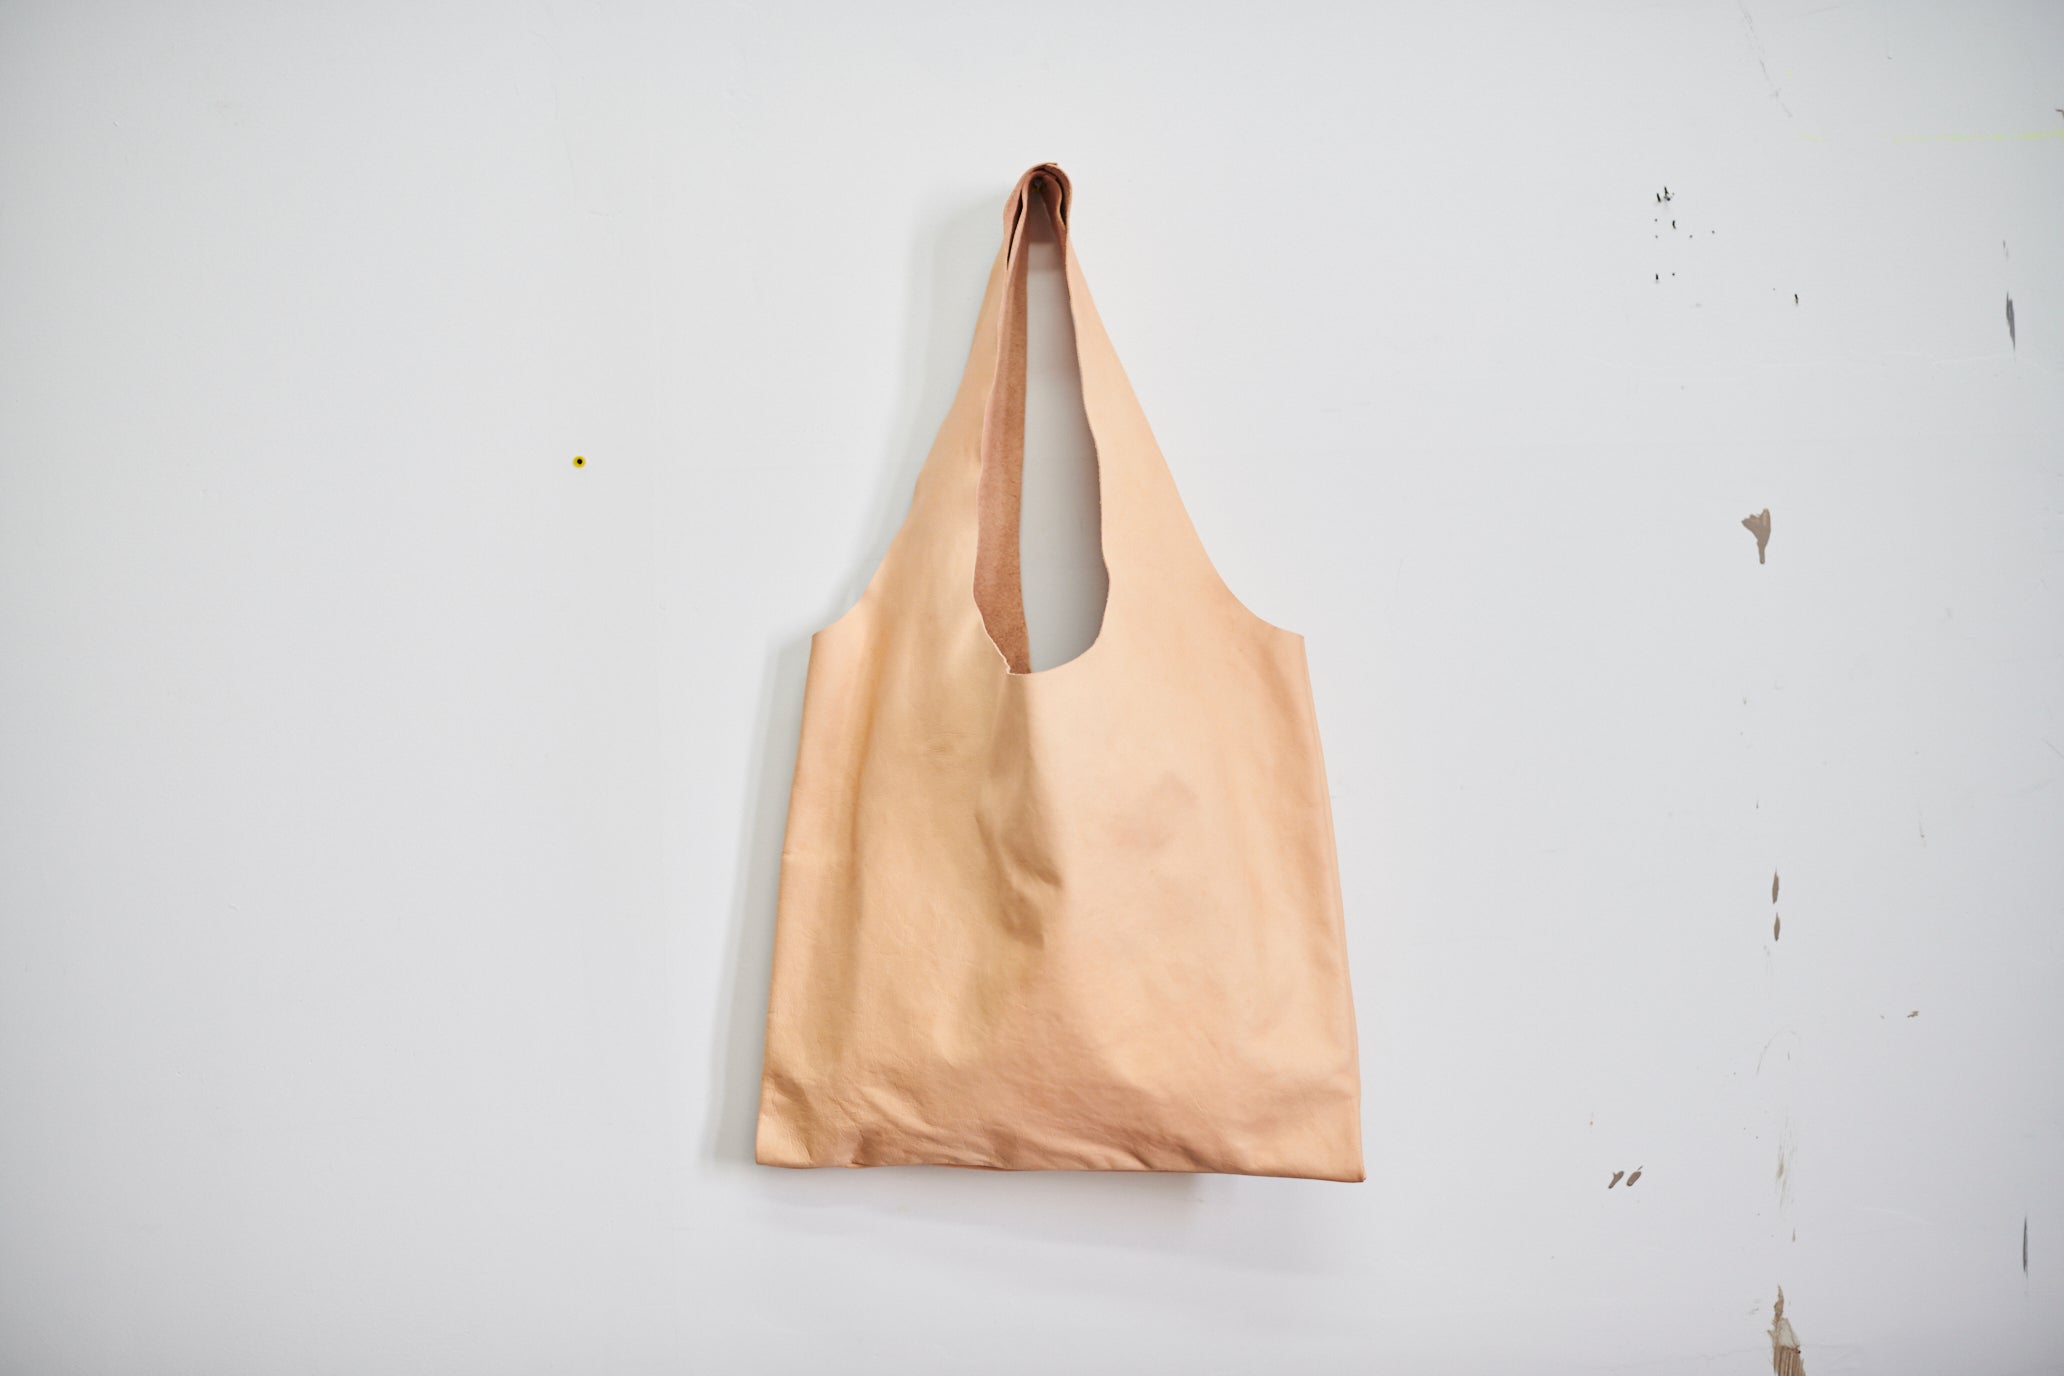 vegetable tanned leather bag